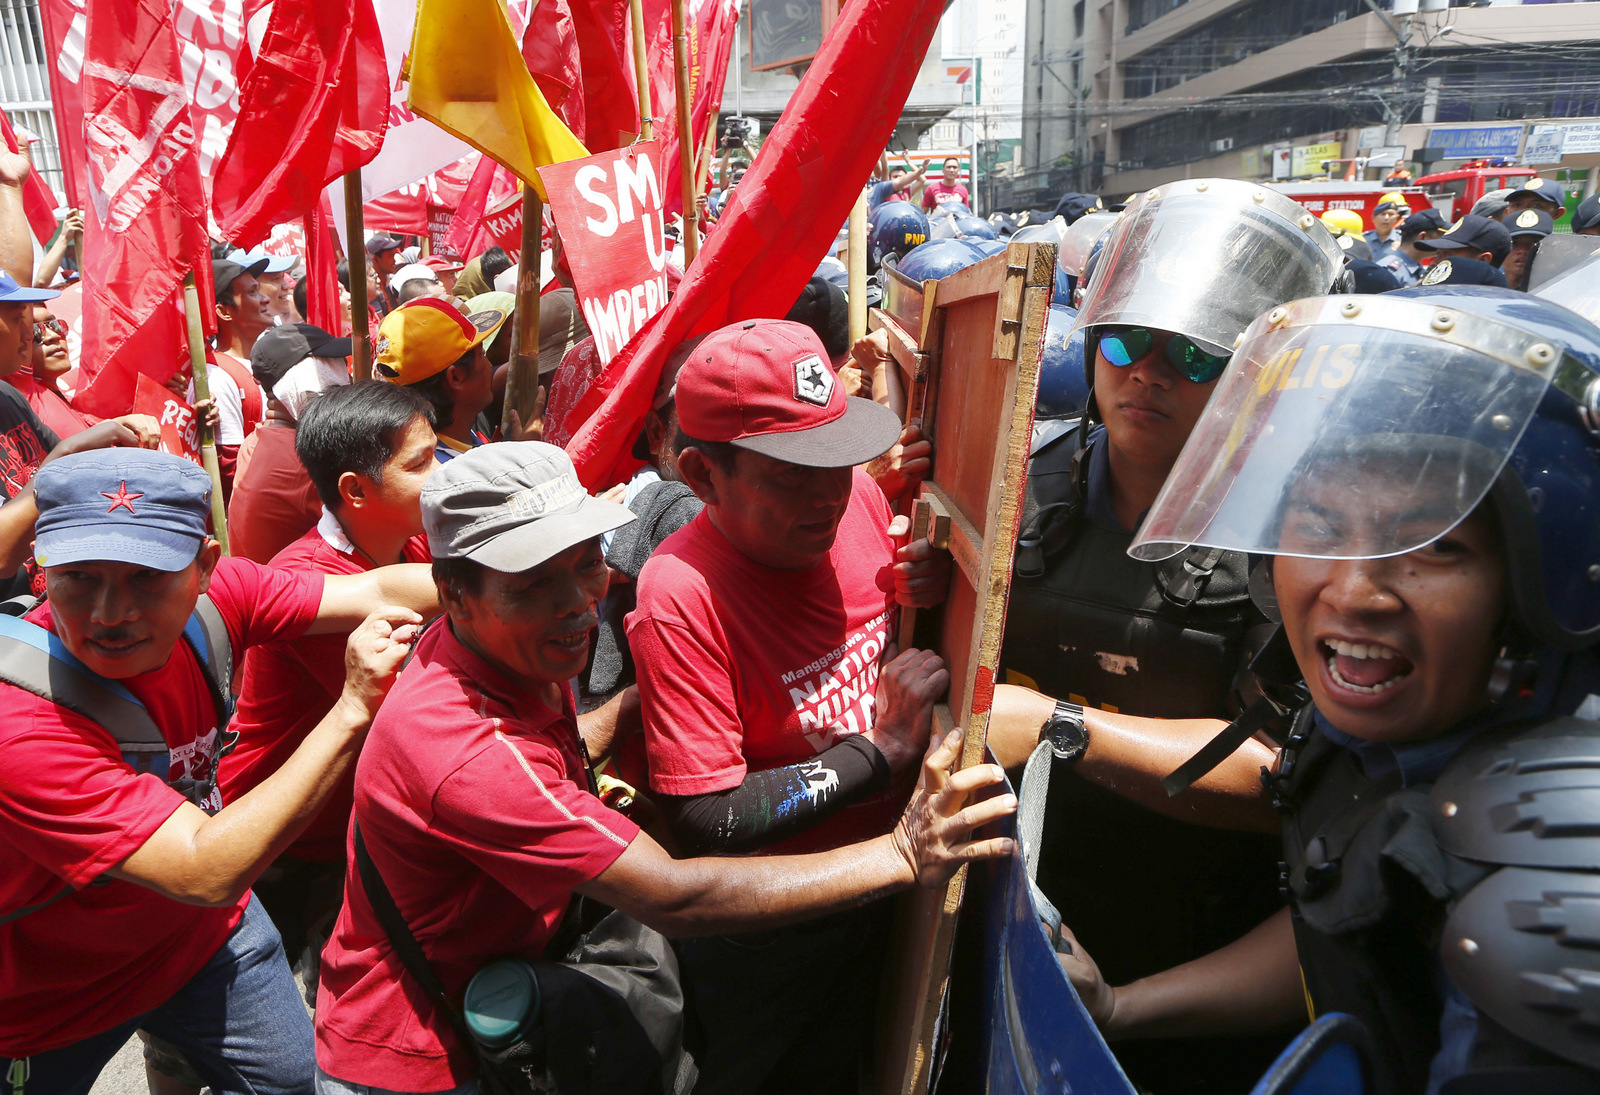 Protesters clash with riot police as they attempt to force their way closer to U.S. Embassy to mark May Day celebrations in Manila, Philippines, Monday, May 1, 2017. As in the past years, workers mark Labor Day with calls for higher wages and an end to the so-called "Endo" or contractualization. 